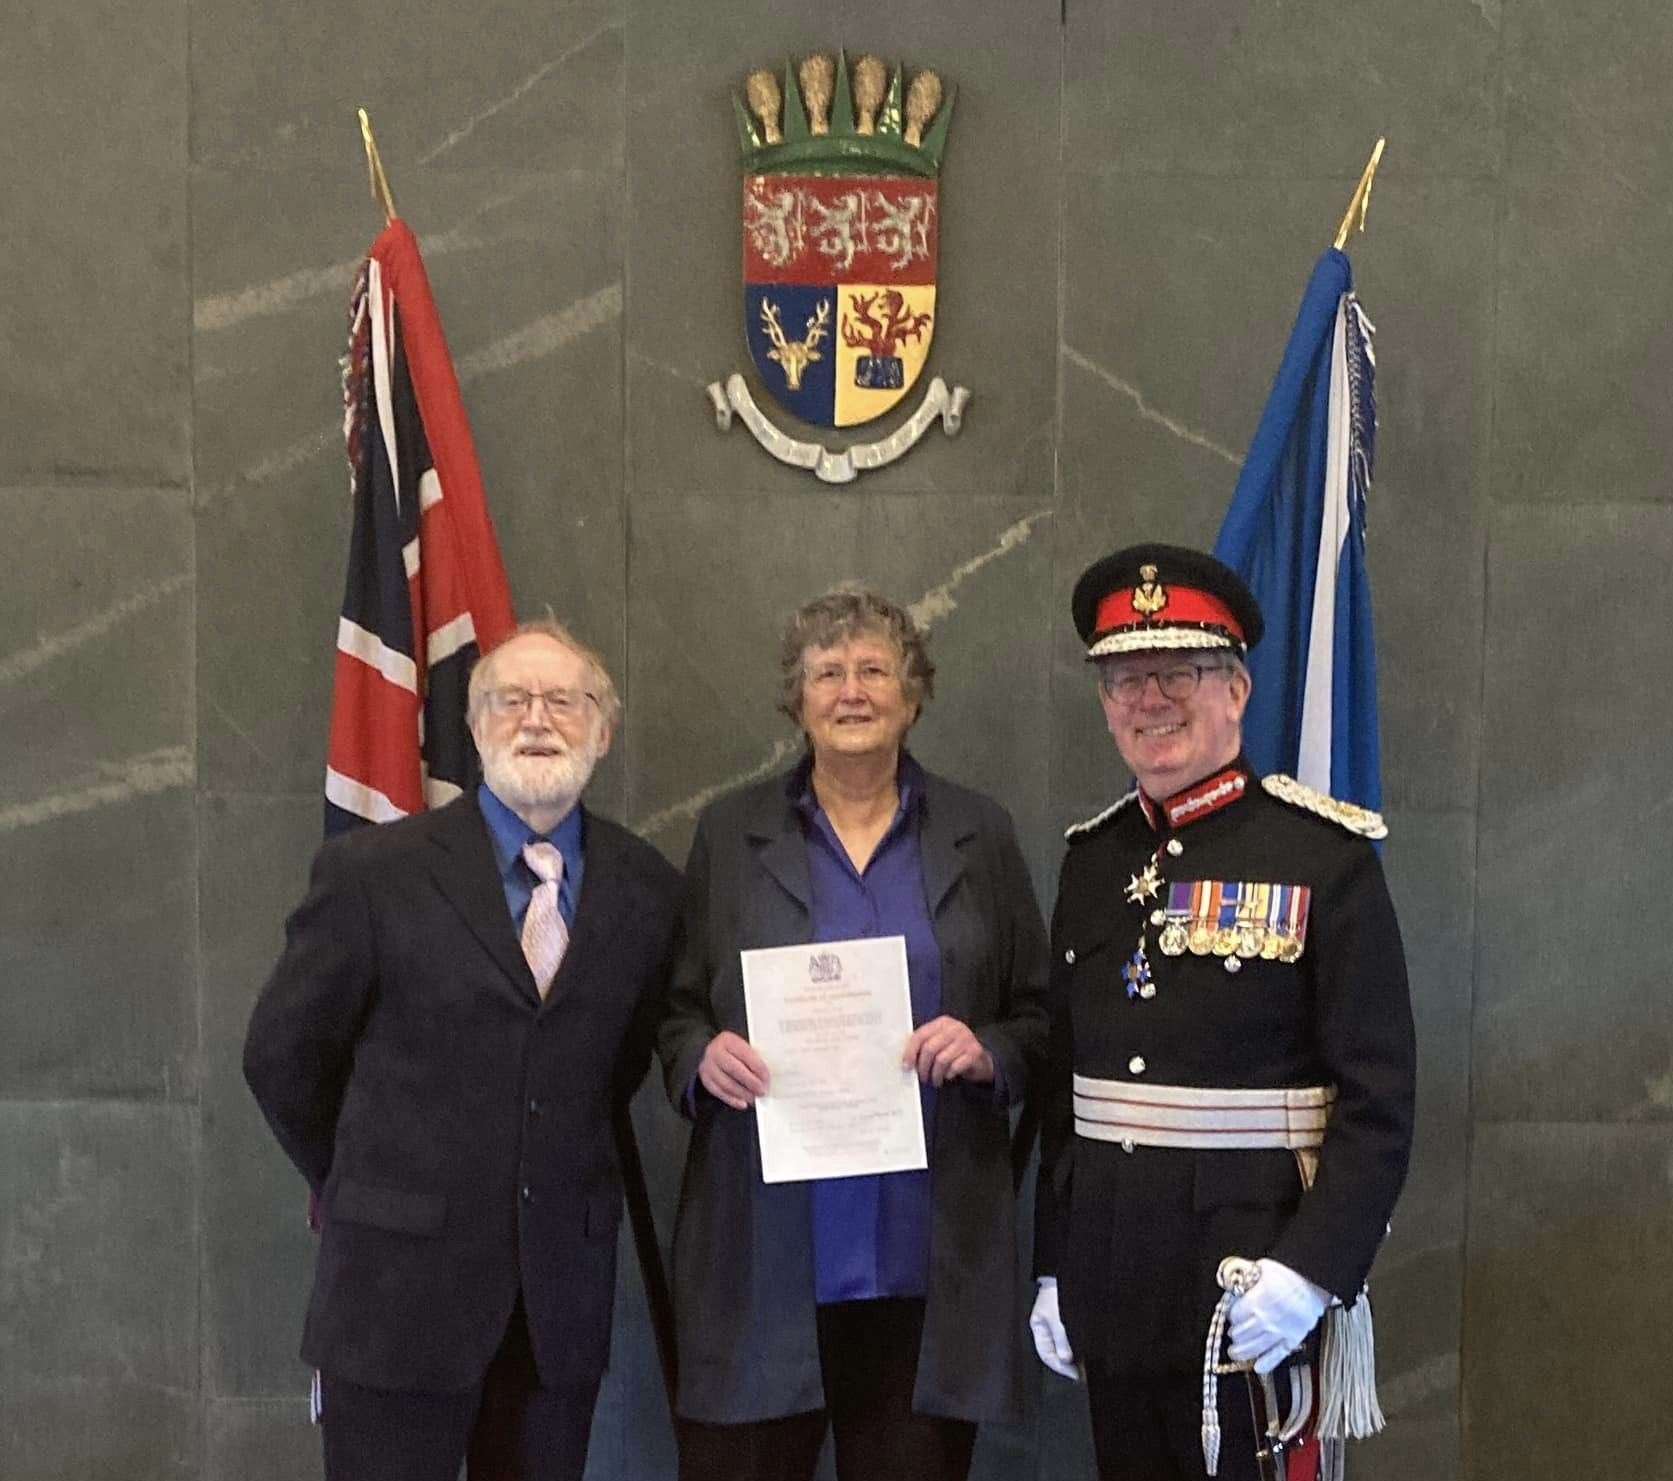 Mrs Margaret Meek, originally from Toronto, received her UK citizenship certificate at a ceremony in Dingwall.